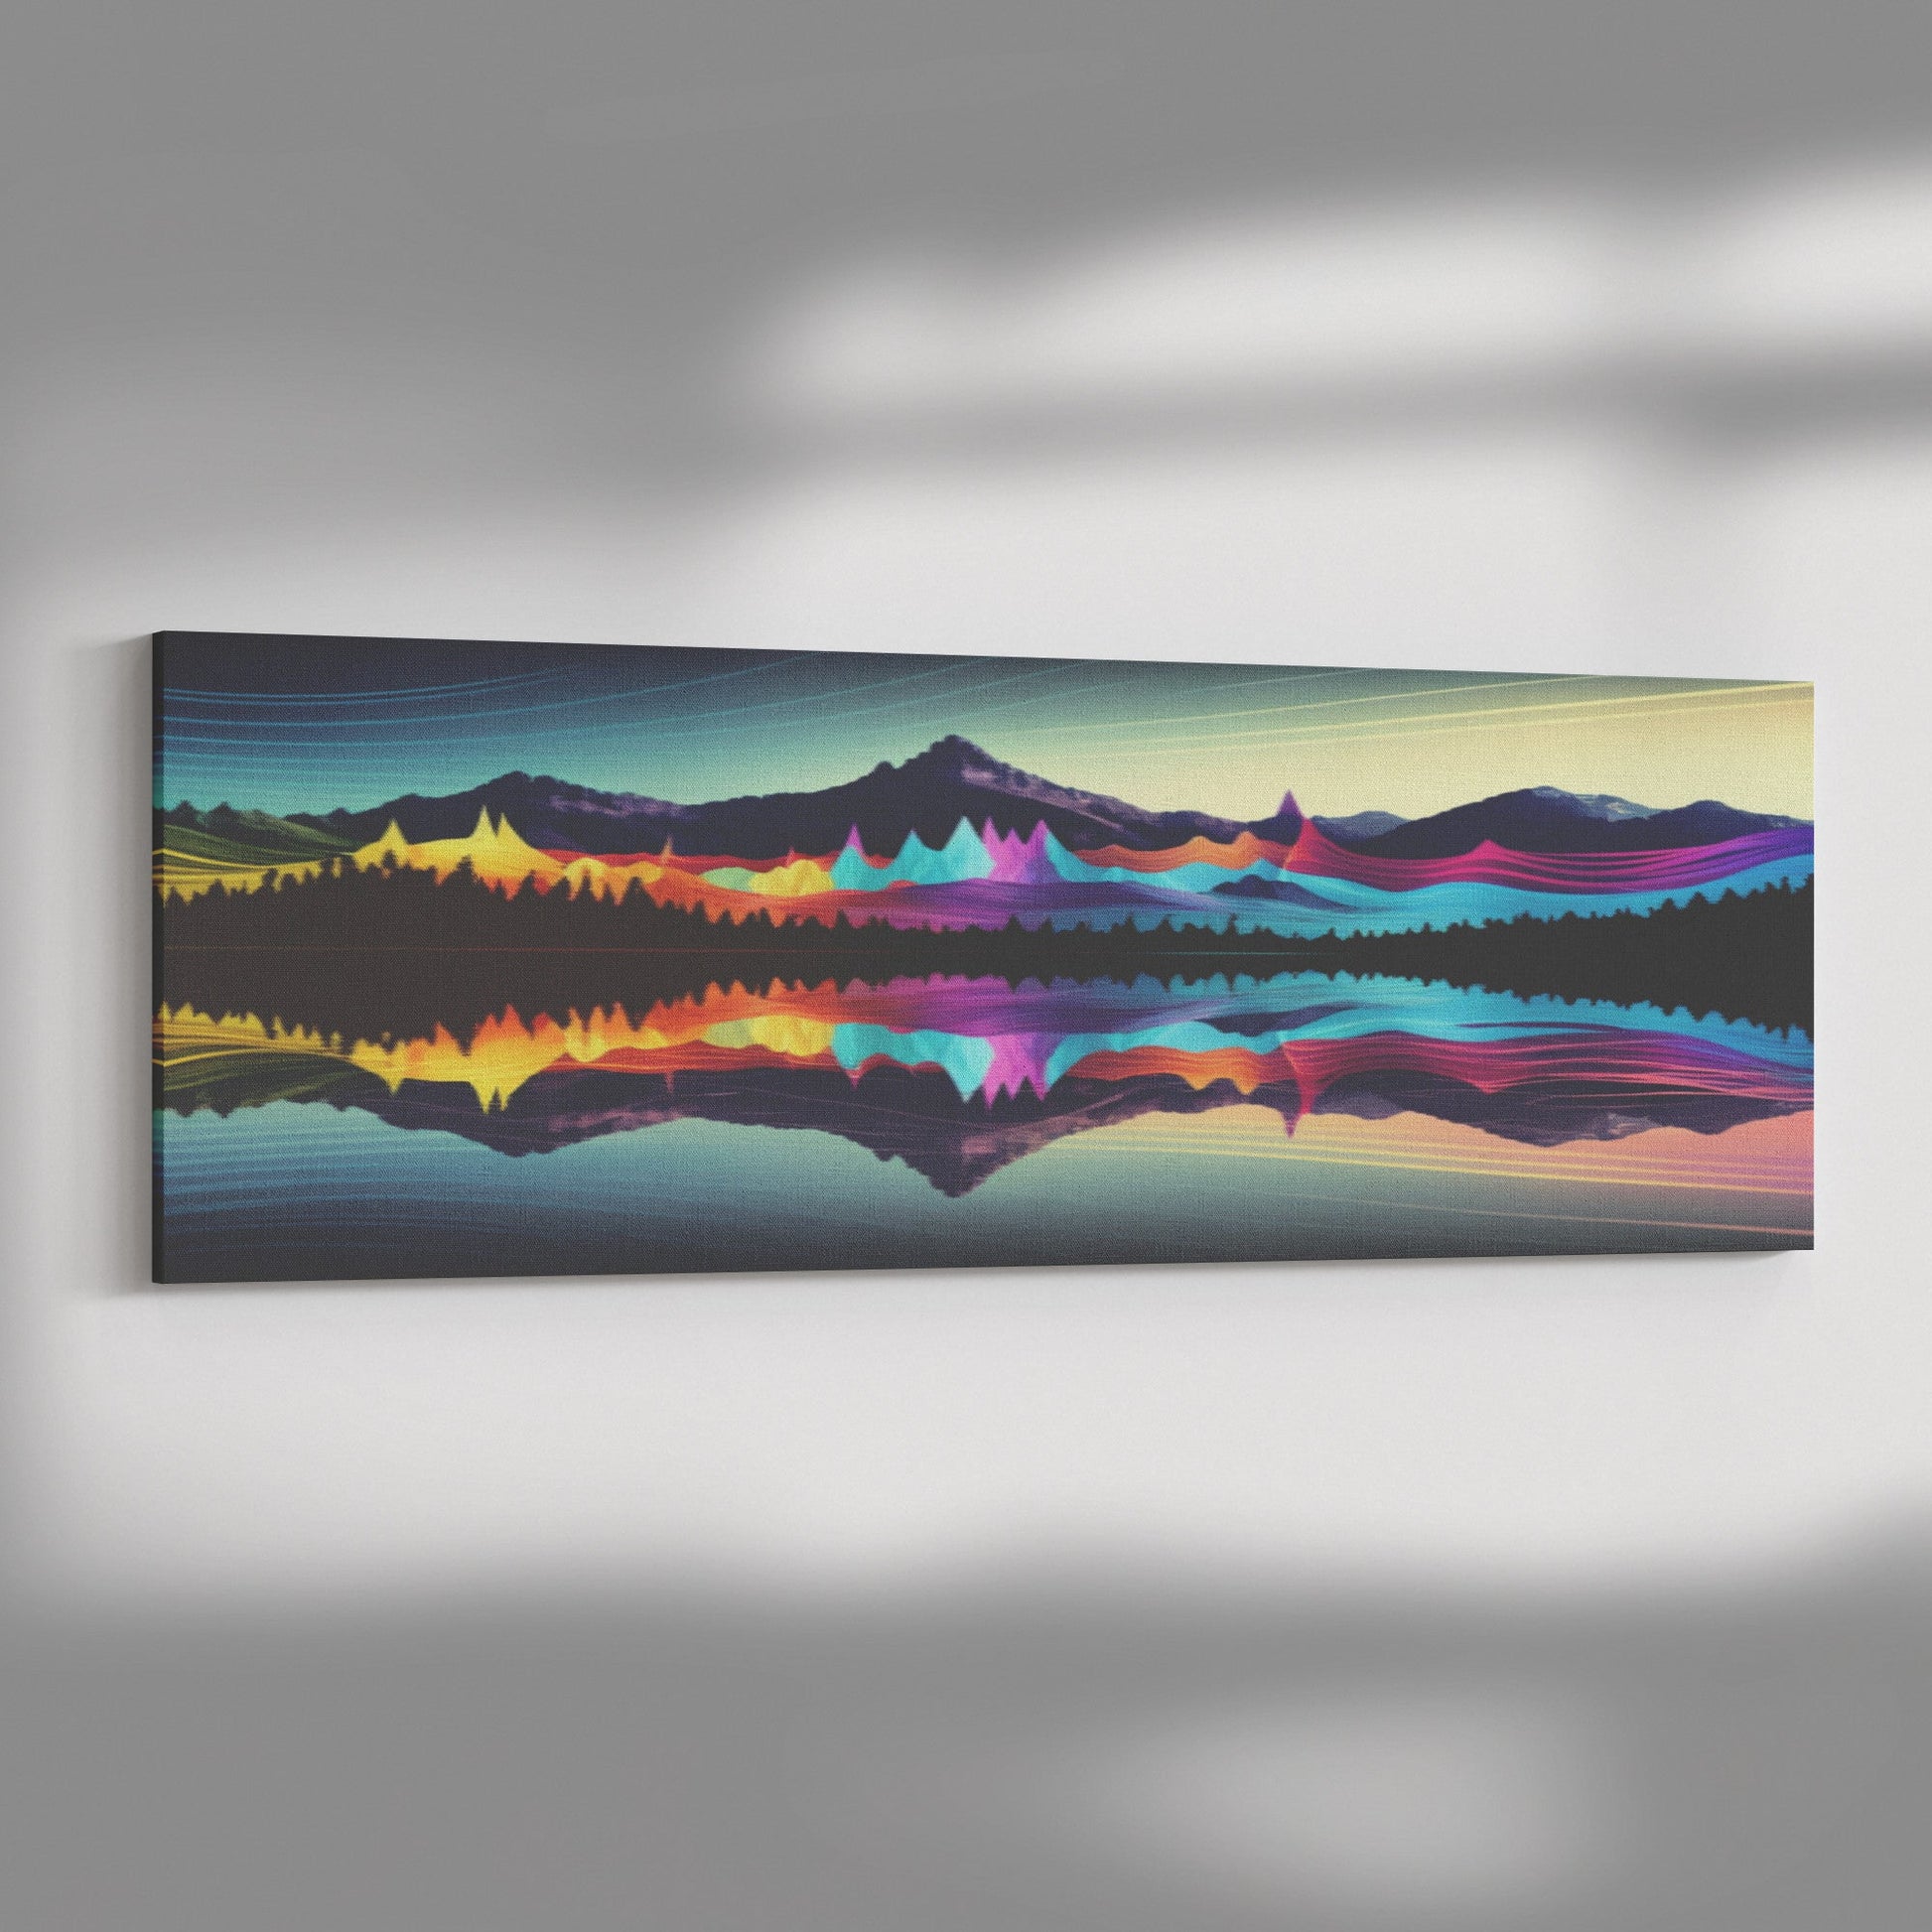 Psychedelic Soundwaves Wall Art Gallery quality canvas print-Shalav5